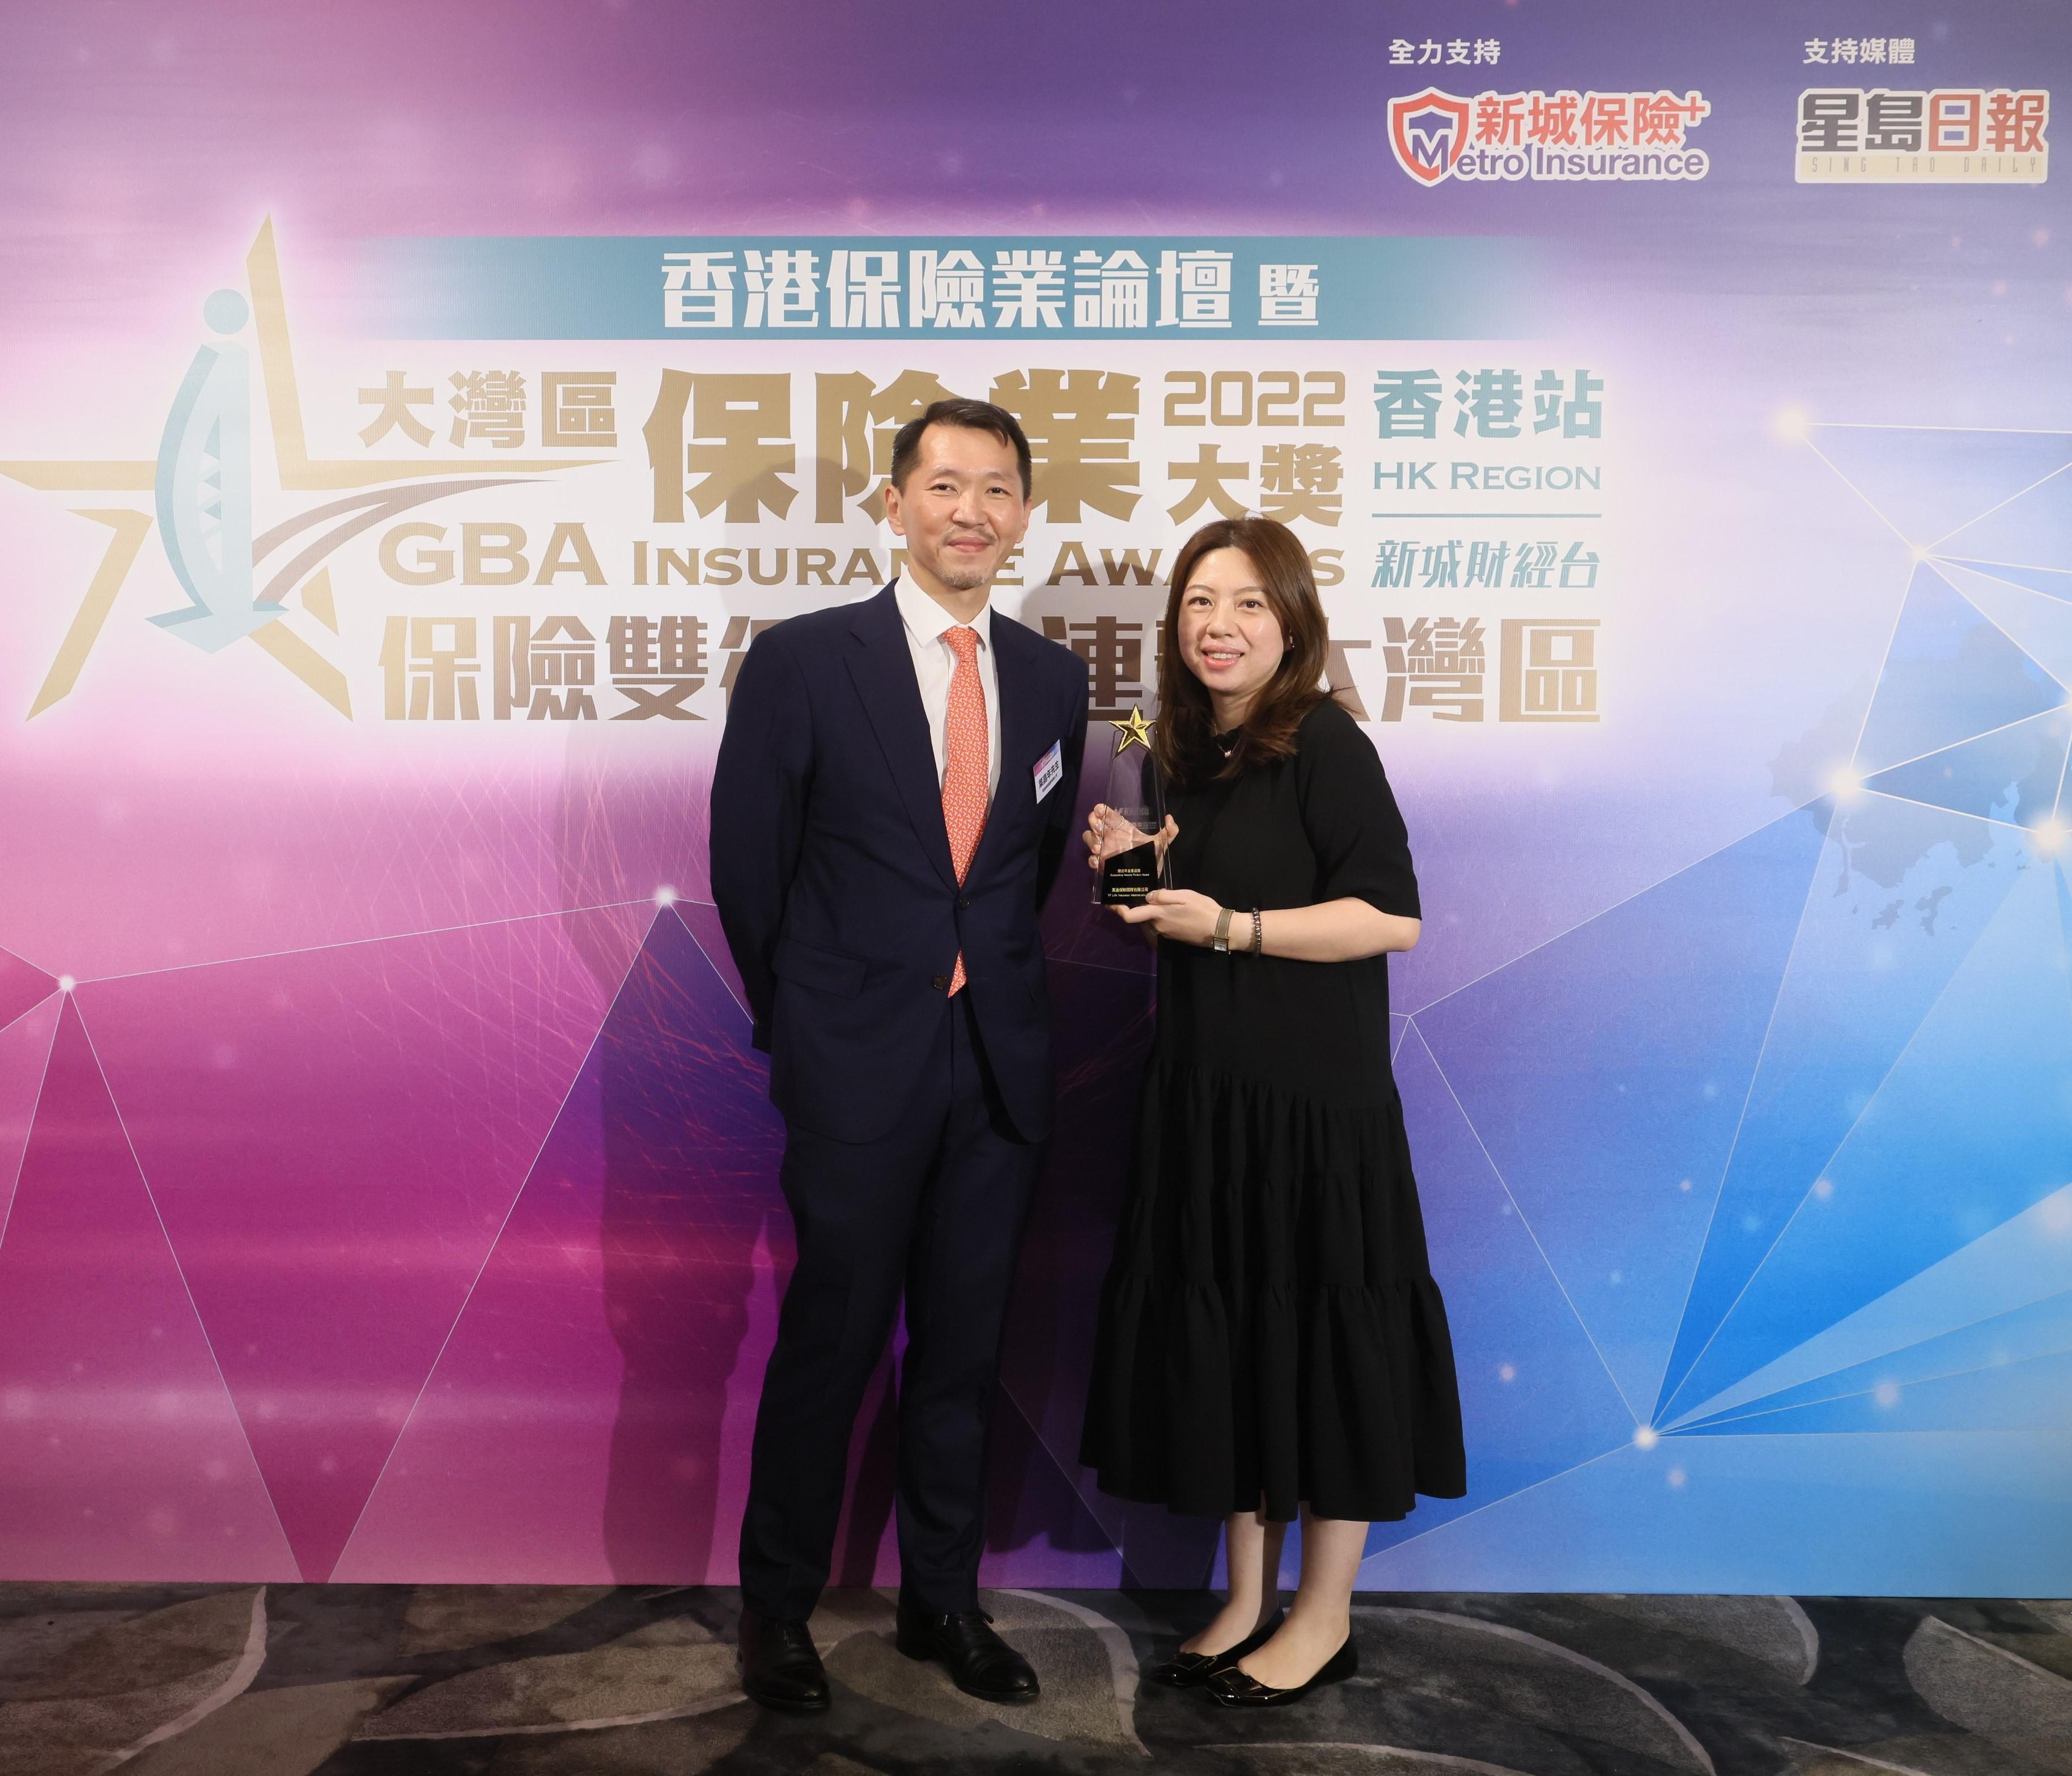 Mr. Victor Yip, Co-Chief Executive Officer at YF Life (left), and Ms. Jasmine Hui, Head of Product Strategy & Pricing at YF Life (right), receive the “Outstanding Annuity Product Award” at the Metro Finance “GBA Insurance Awards 2022 - HK Region”.